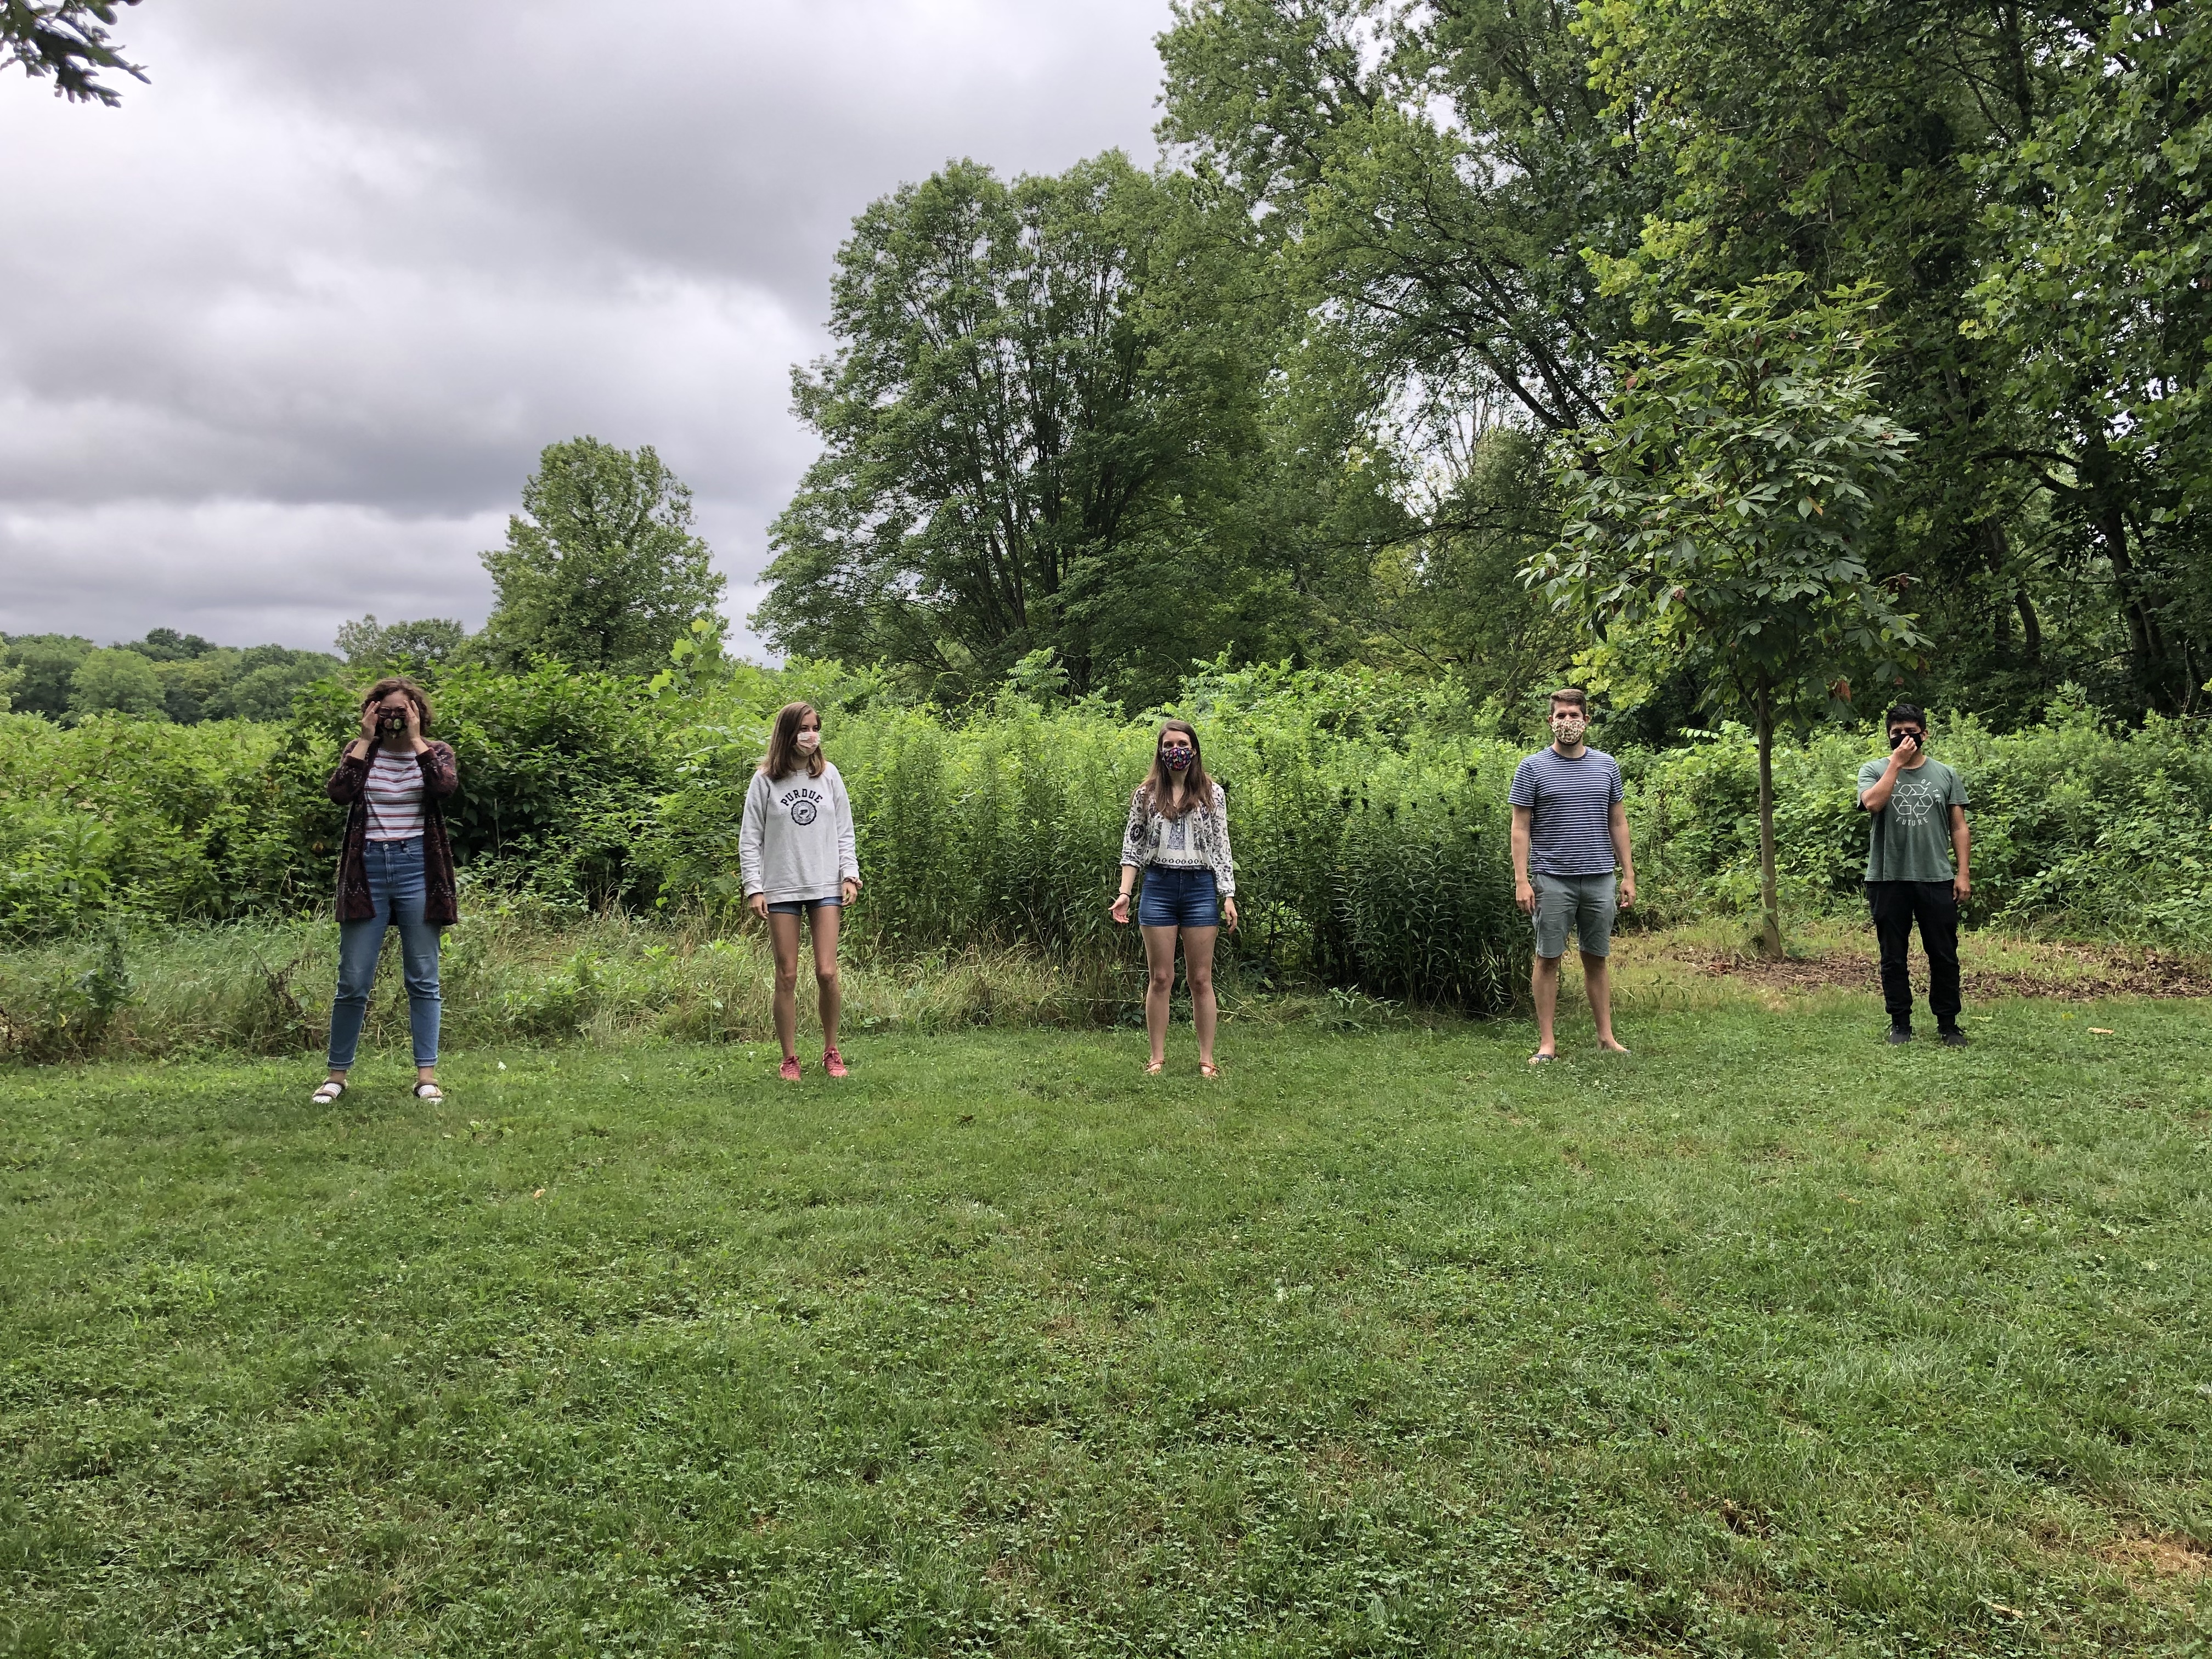 A Cooperstone/Francis + affiliates socially distanted graduation party at Highbanks Metro Park for Emma, Jenna, Mallory, Michael, and Eduardo Bernal, August 2020.